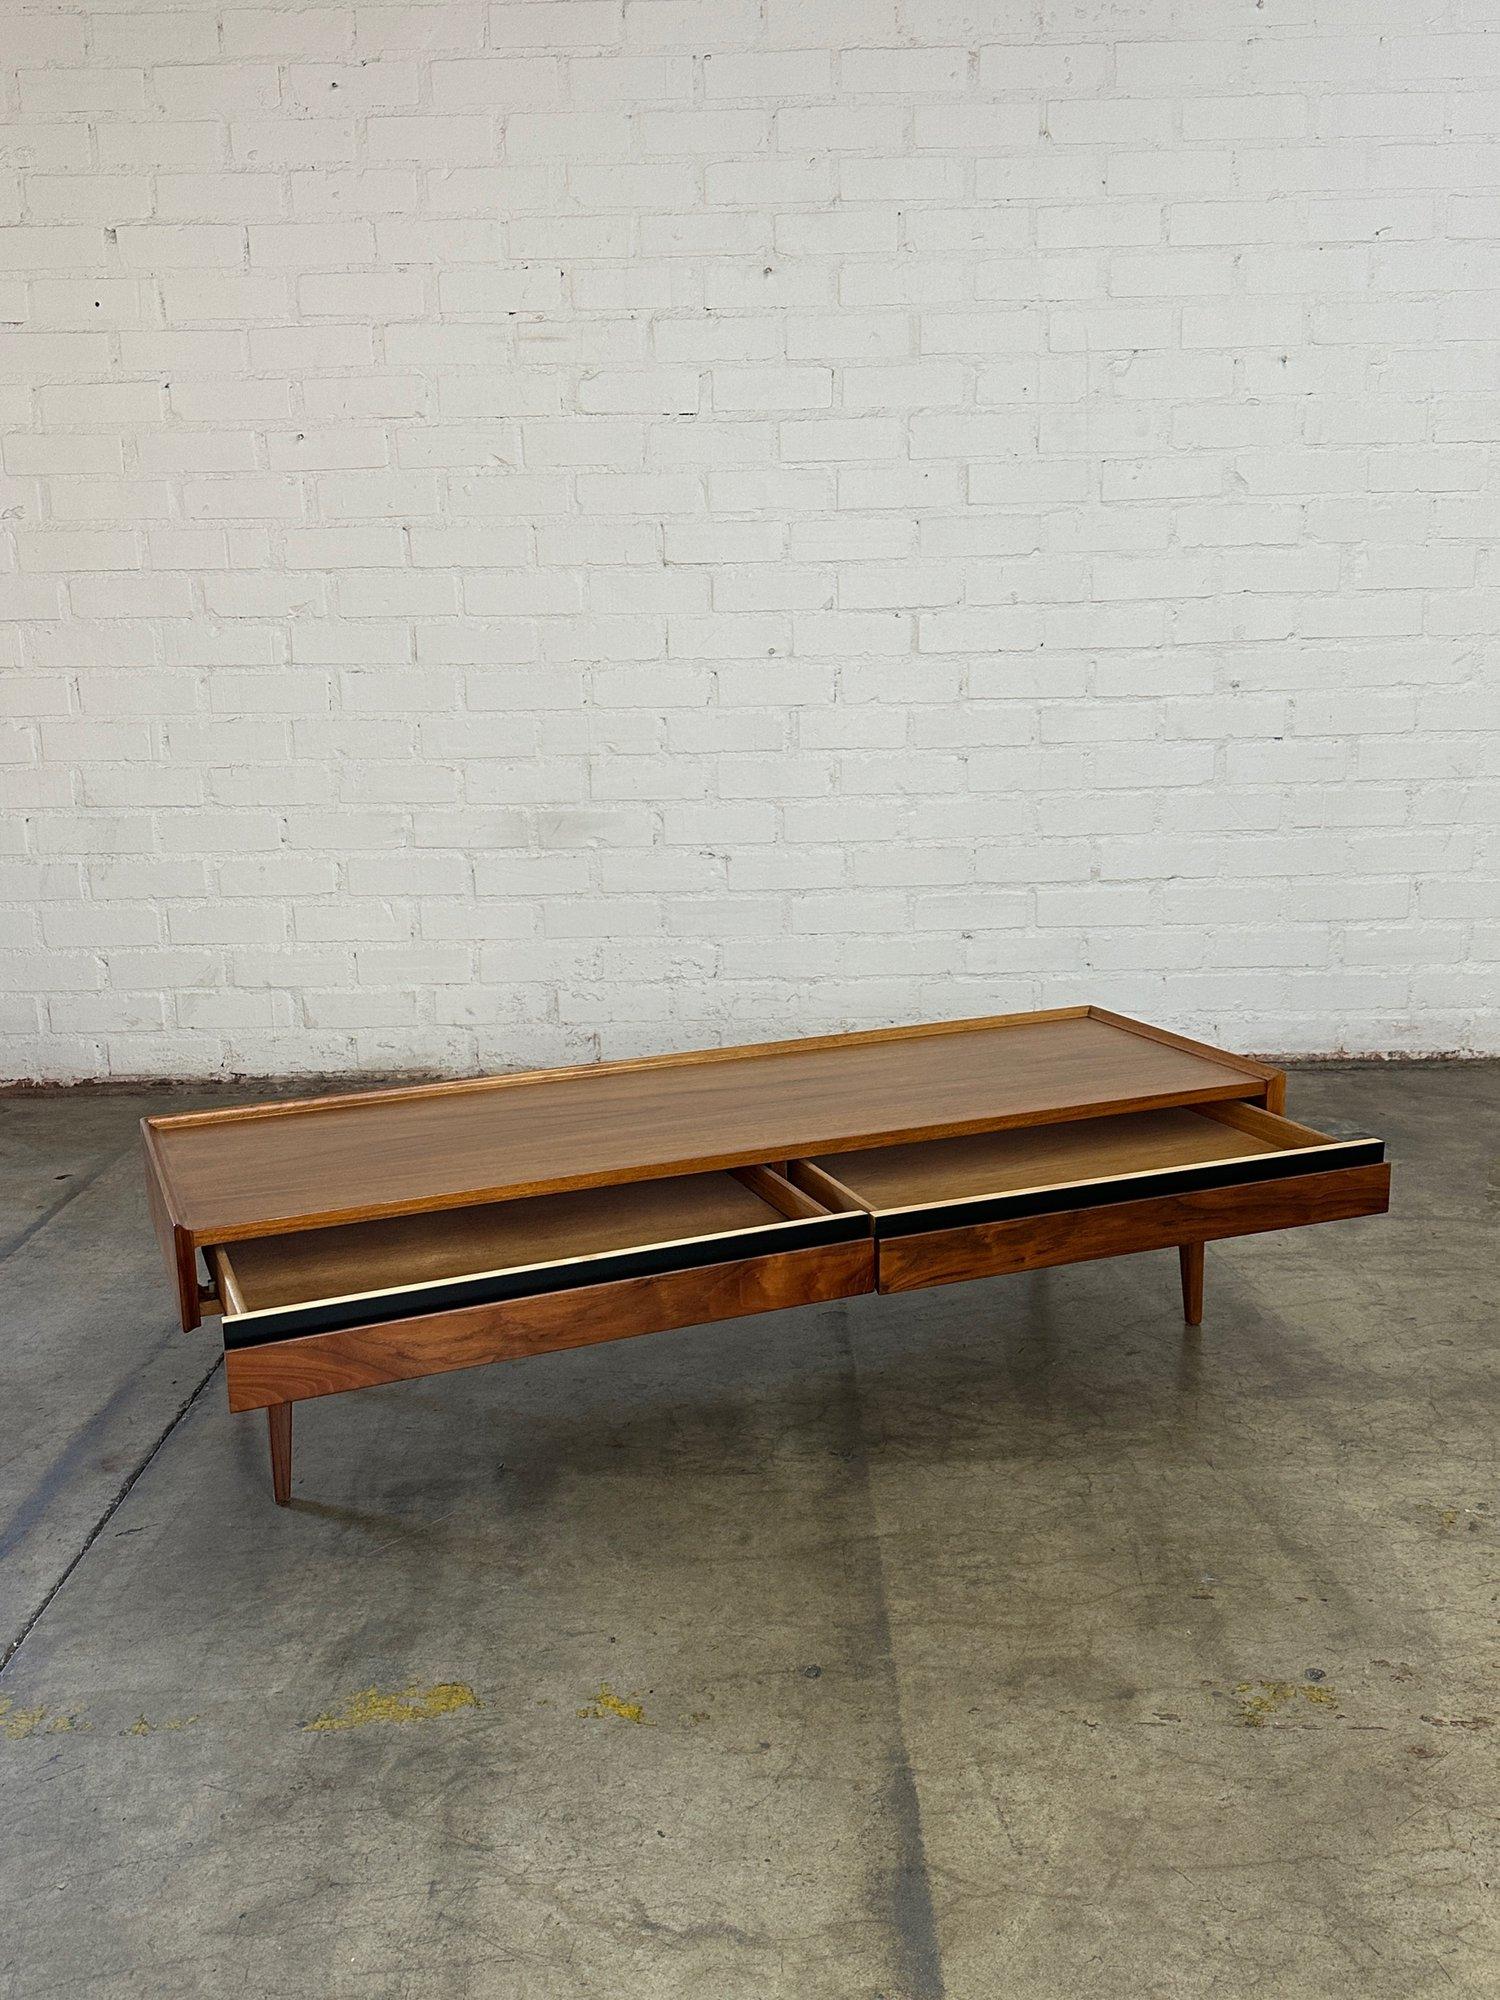 W60 D19.5 D19 H15

Fully restored walnut coffee table by Dillingham. Item offers a great minimal low profile with subtle details. Coffee table has tapered legs, a risen back edge surface,  black accents, and minimal hidden pulls for drawers. Item is